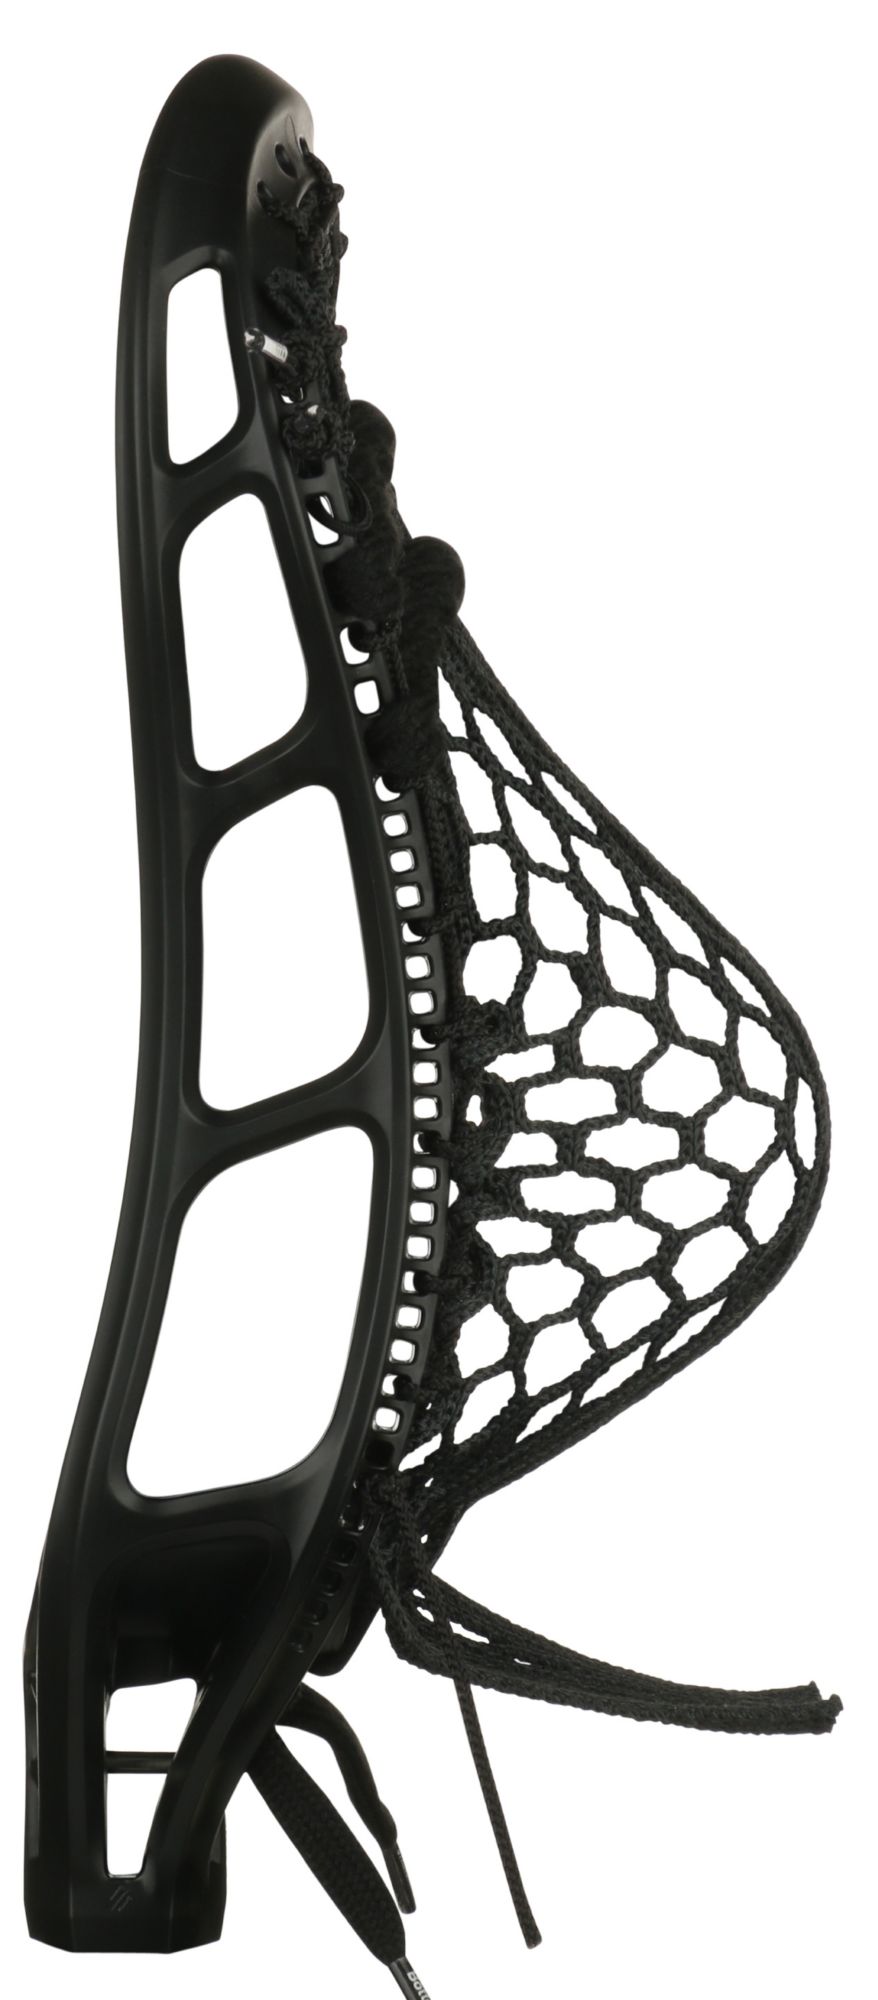 StringKing Mark 2A Lacrosse Head with 5X Mesh